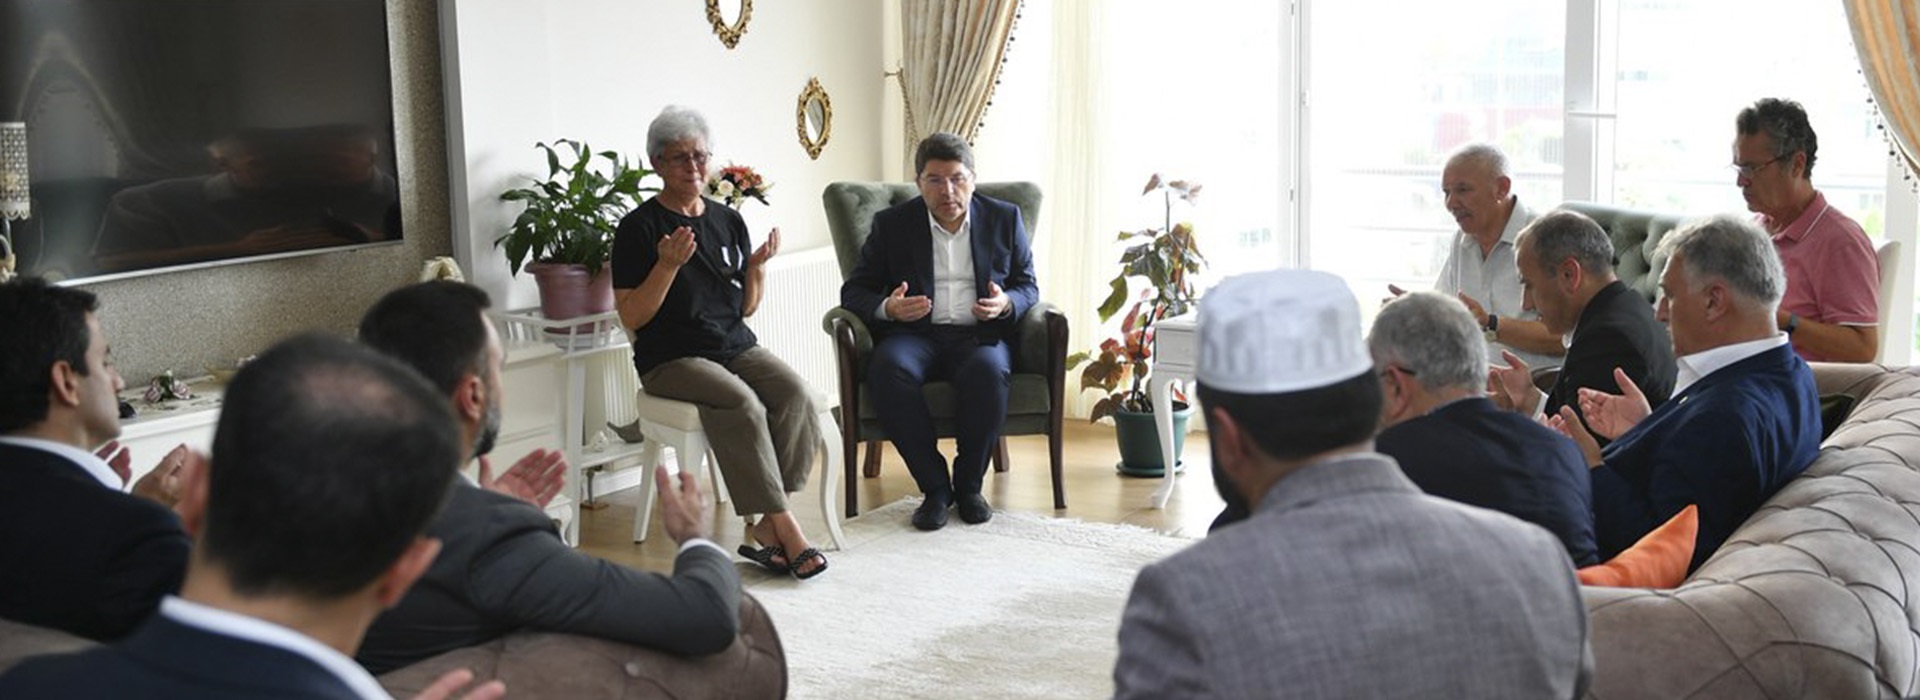 MINISTER OF JUSTICE TUNÇ VISITED MARTYRED JUDGE ALAN'S FAMILY IN ORDU 